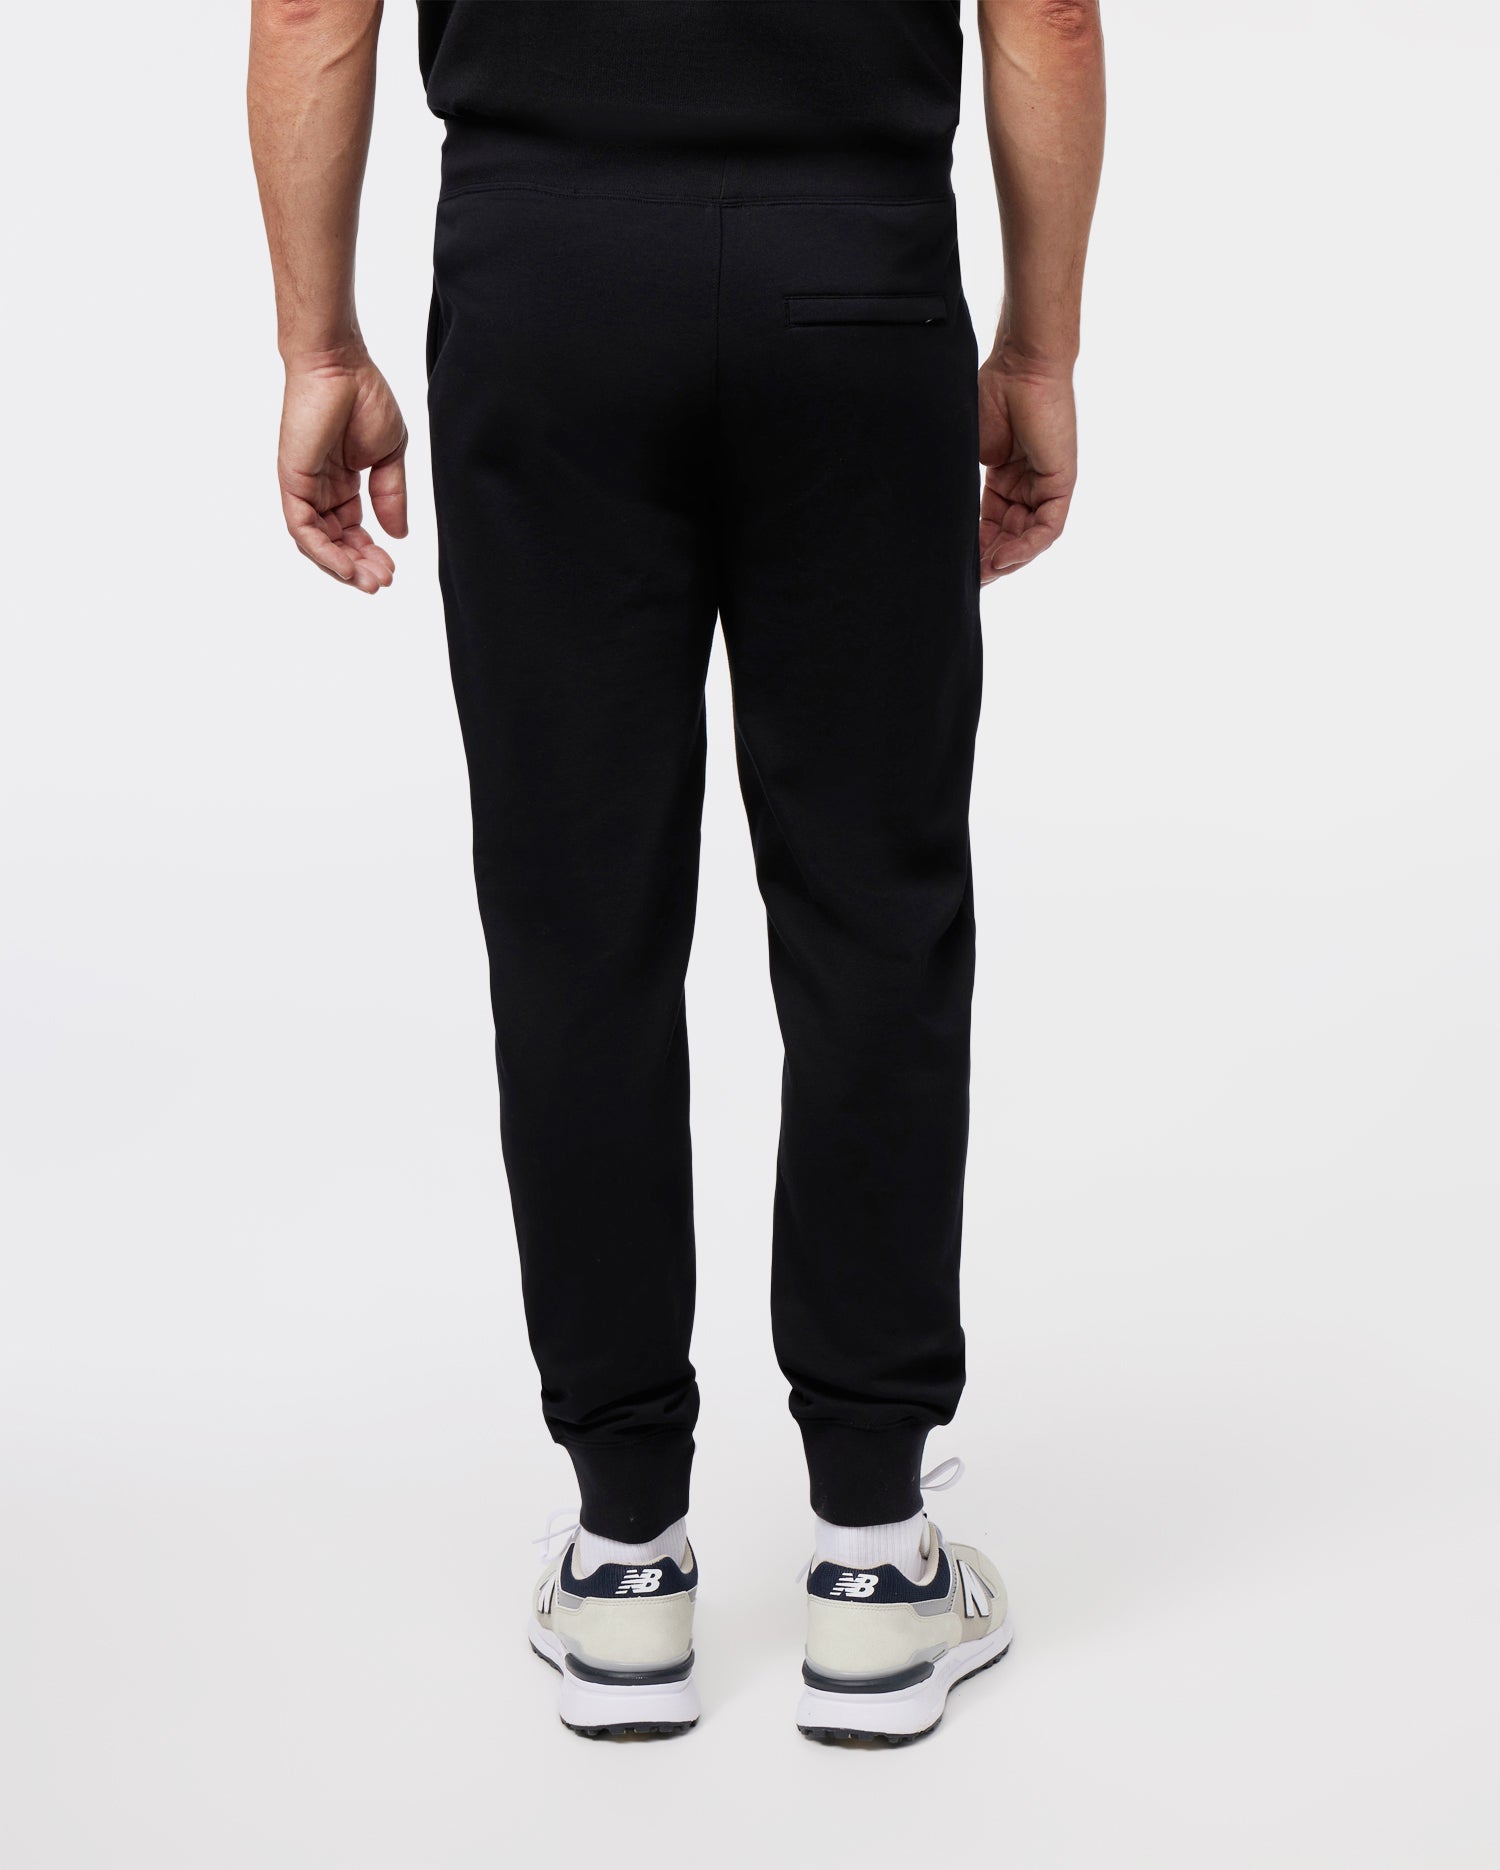 MENS BLACK YORKVILLE EMBROIDERED SWEATPANT | PSYCHO BUNNY – Psycho Bunny